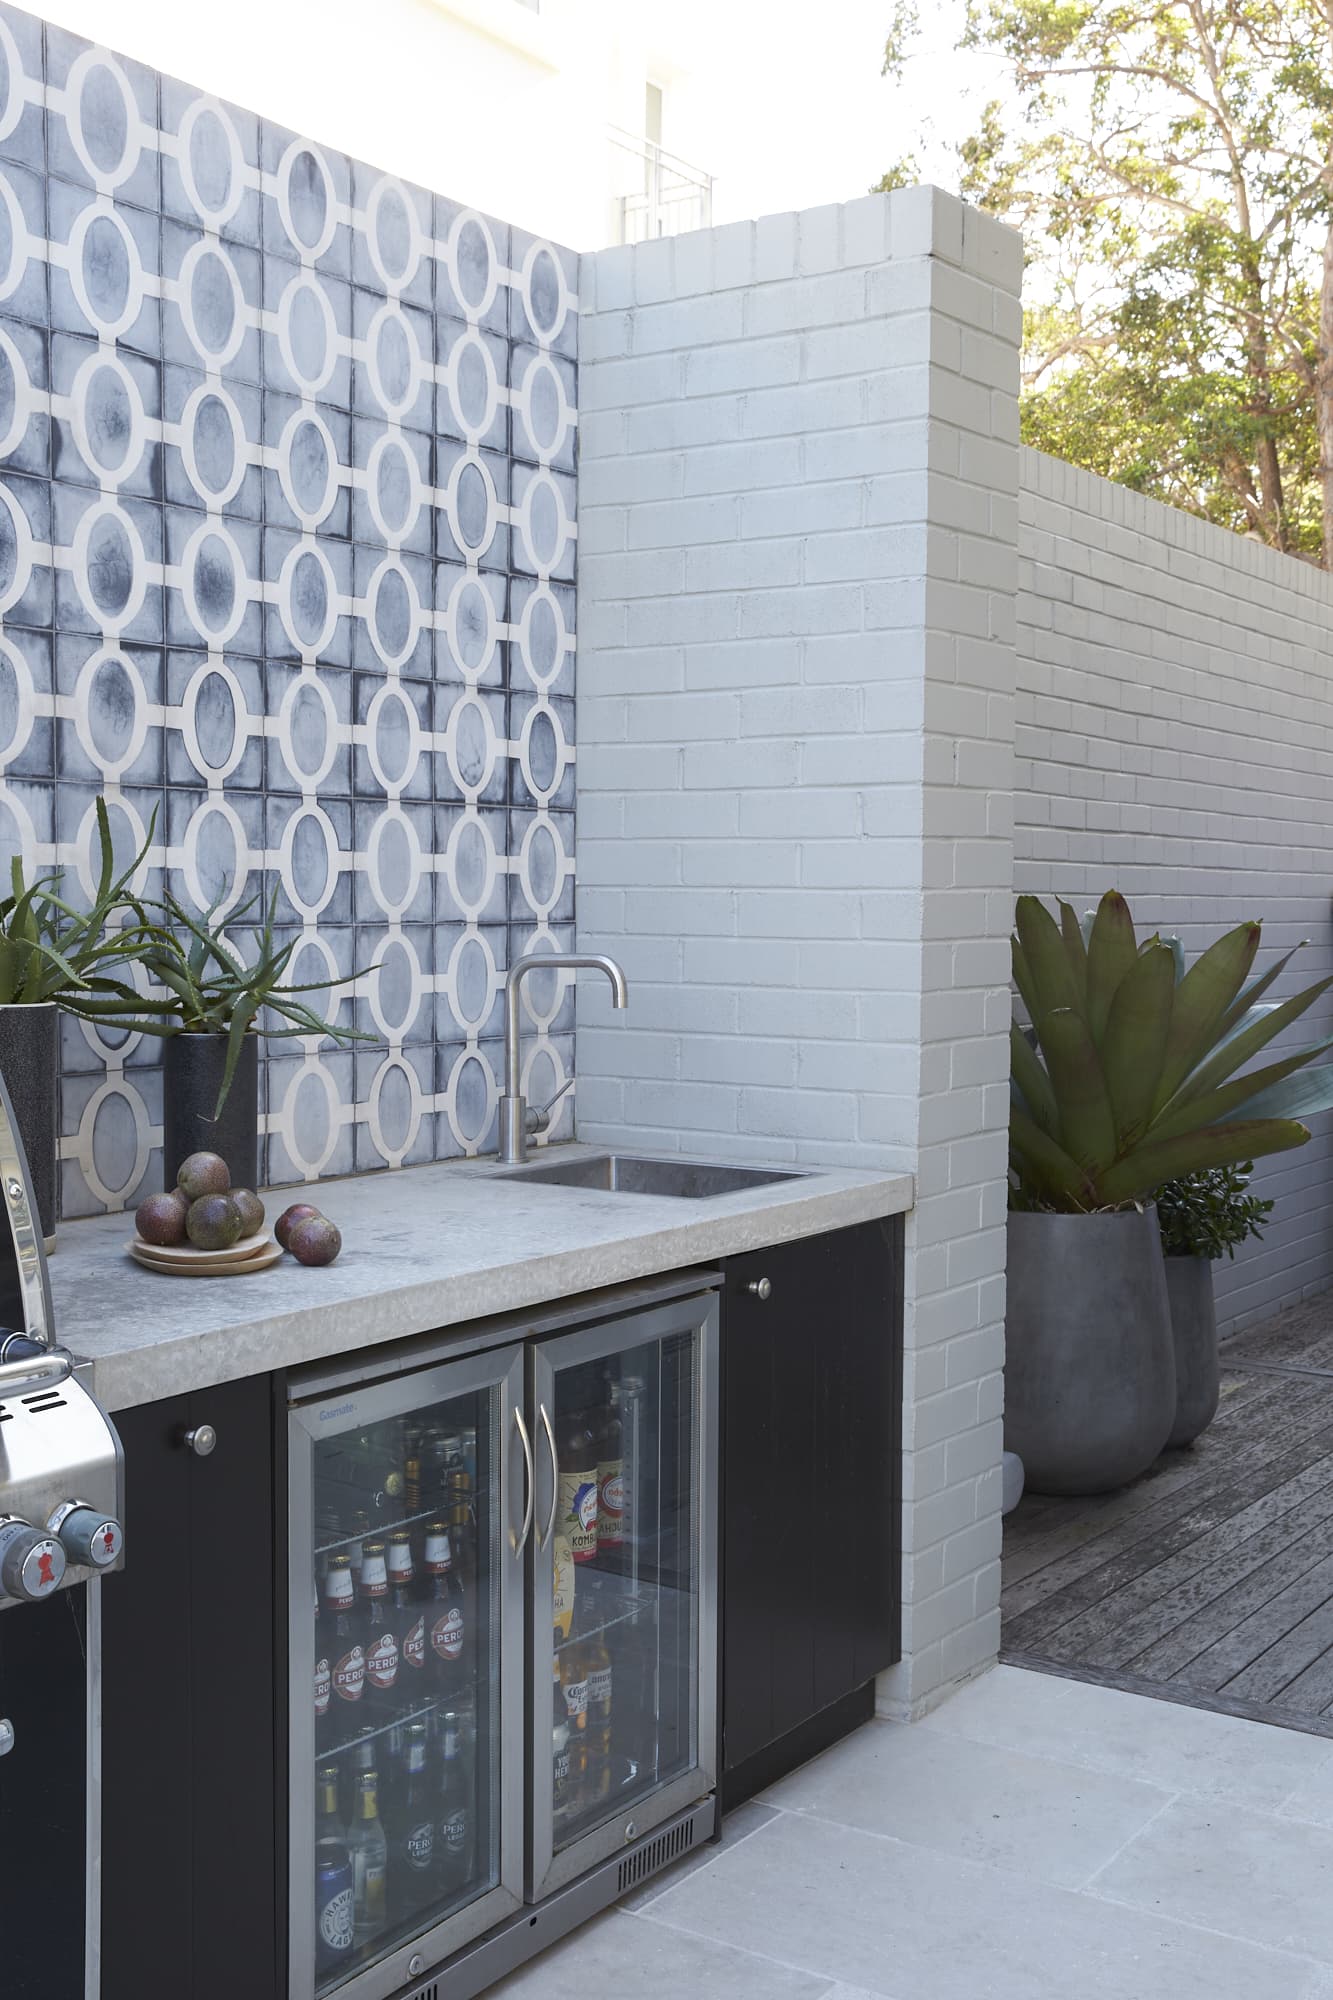 18 Outdoor Kitchen Ideas With Photos of Inspiring Spaces ...